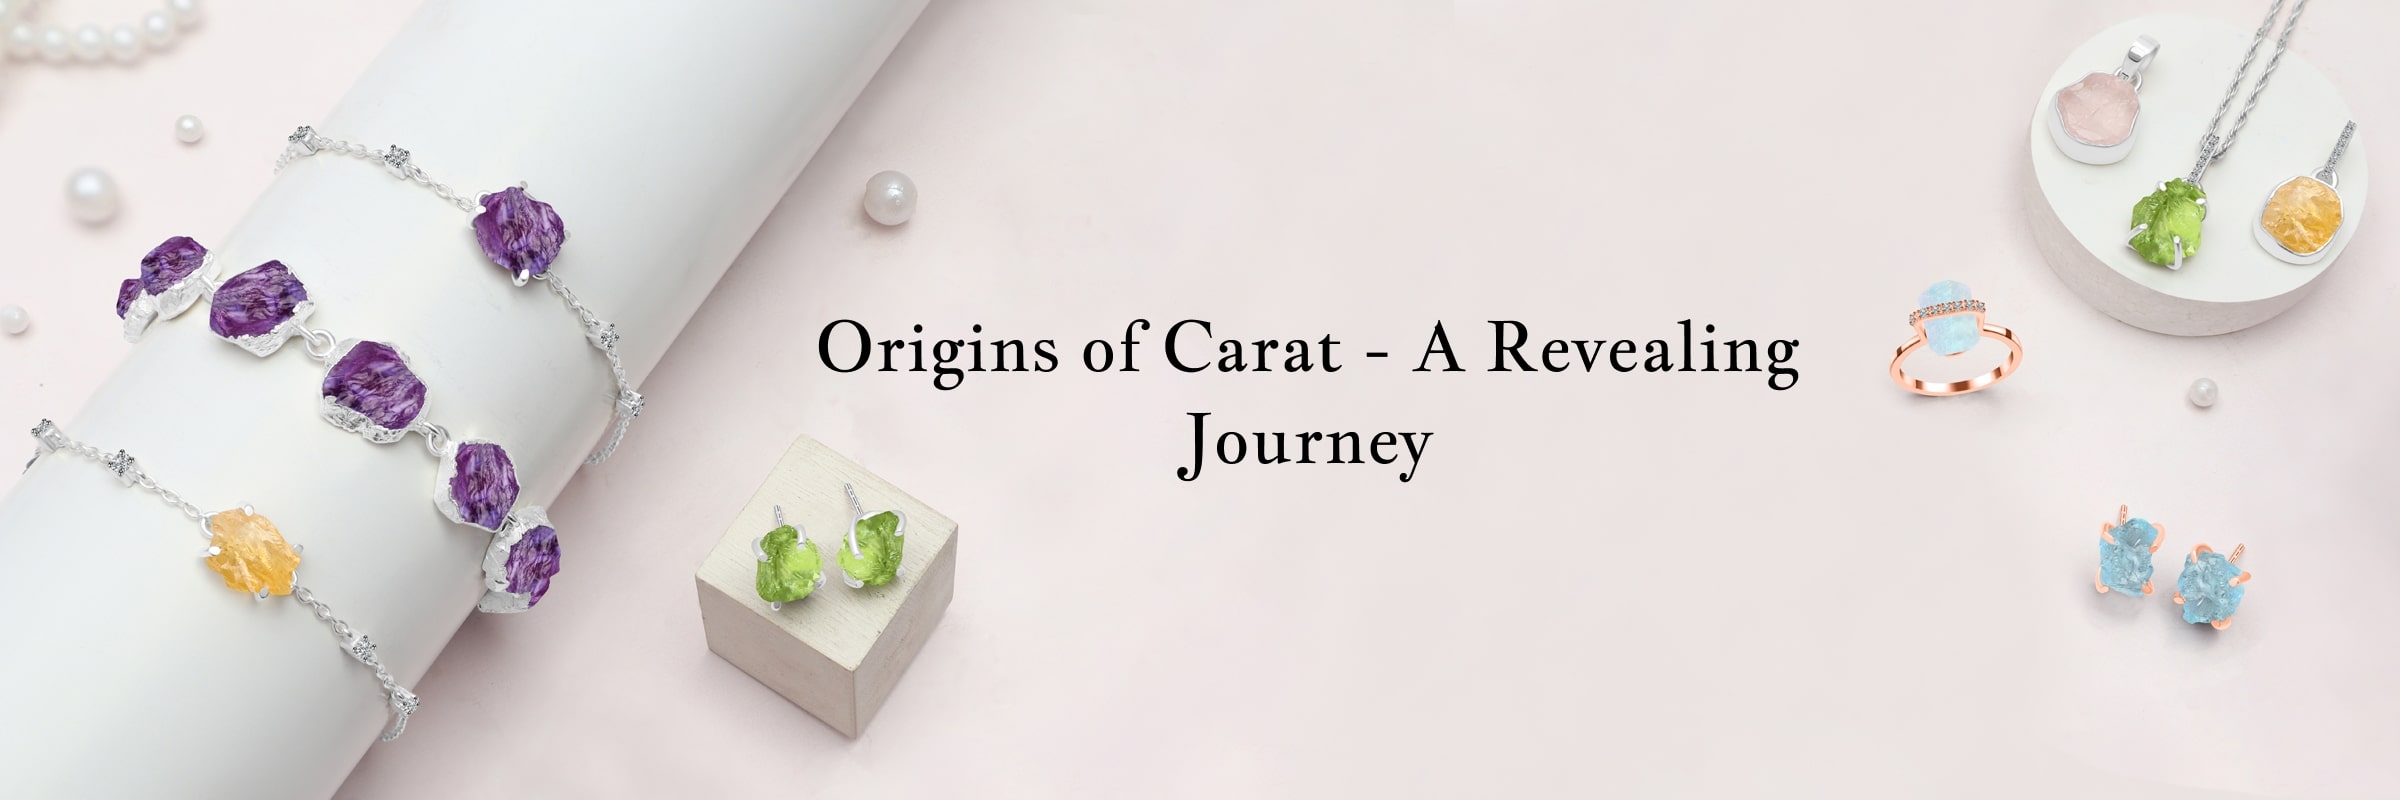 Where Does the Term Carat Come From?